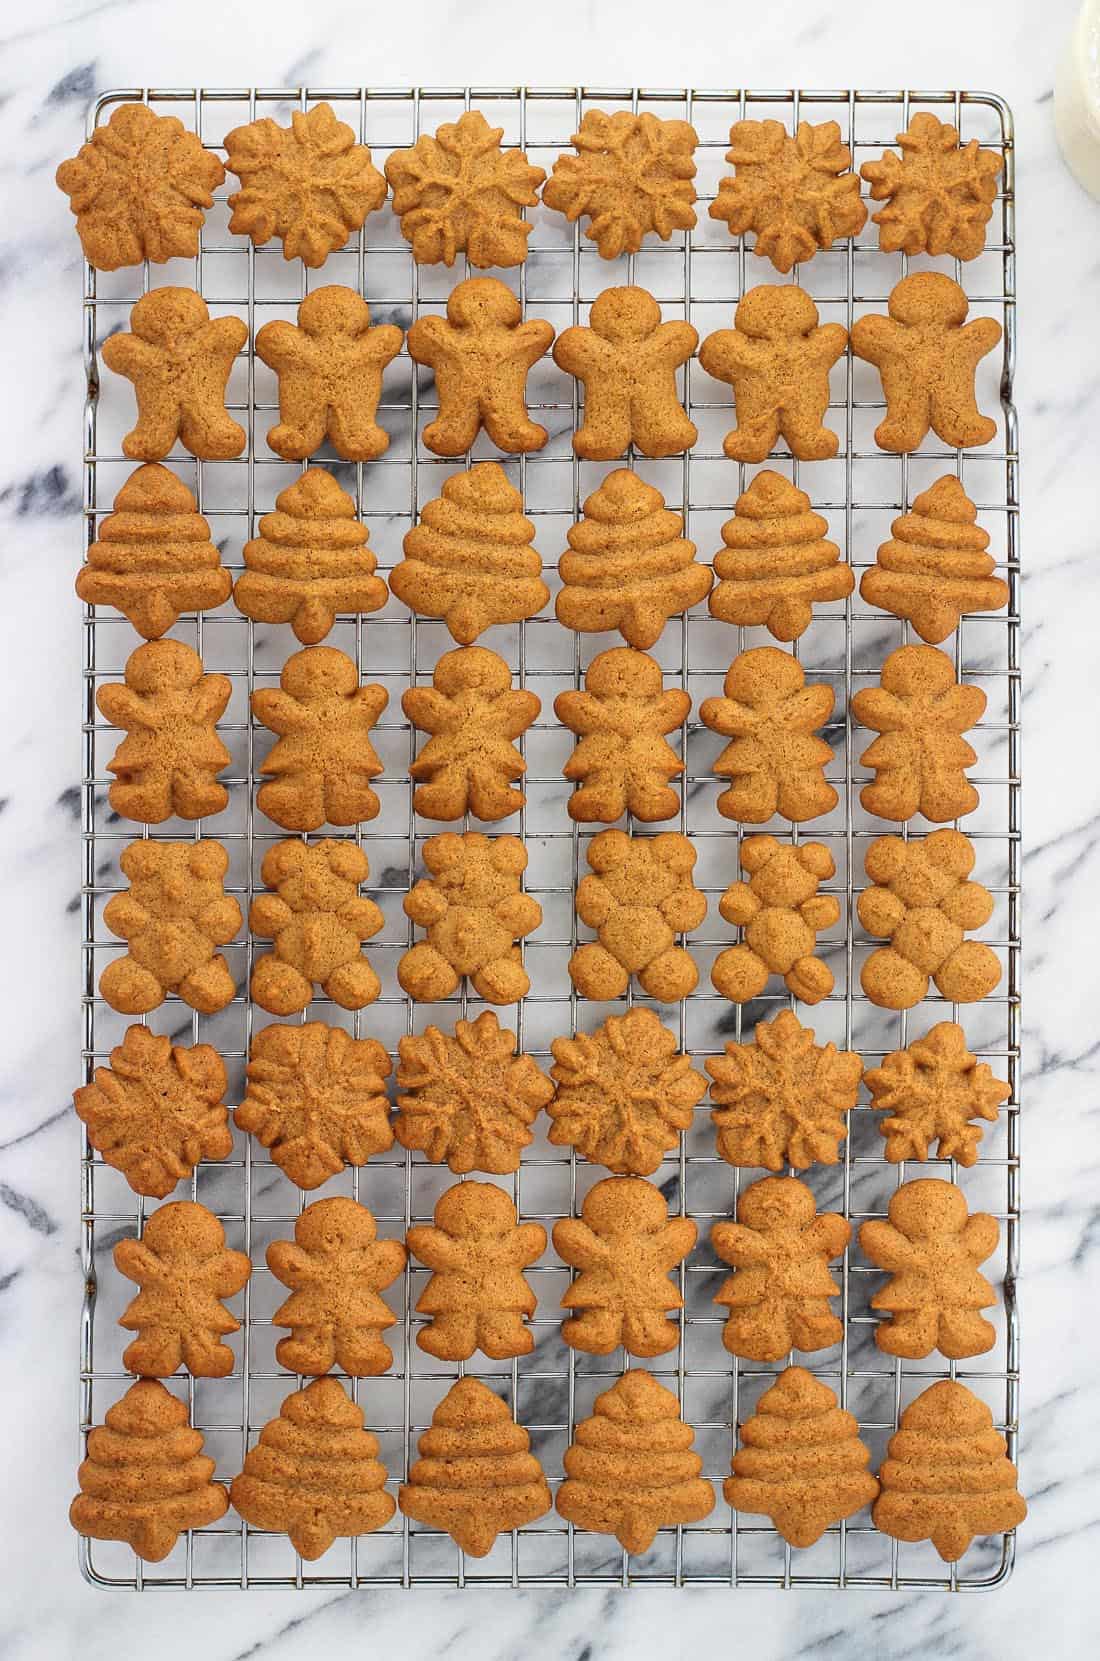 An overhead picture of rows of differently shaped cookies on a wire cooling rack.